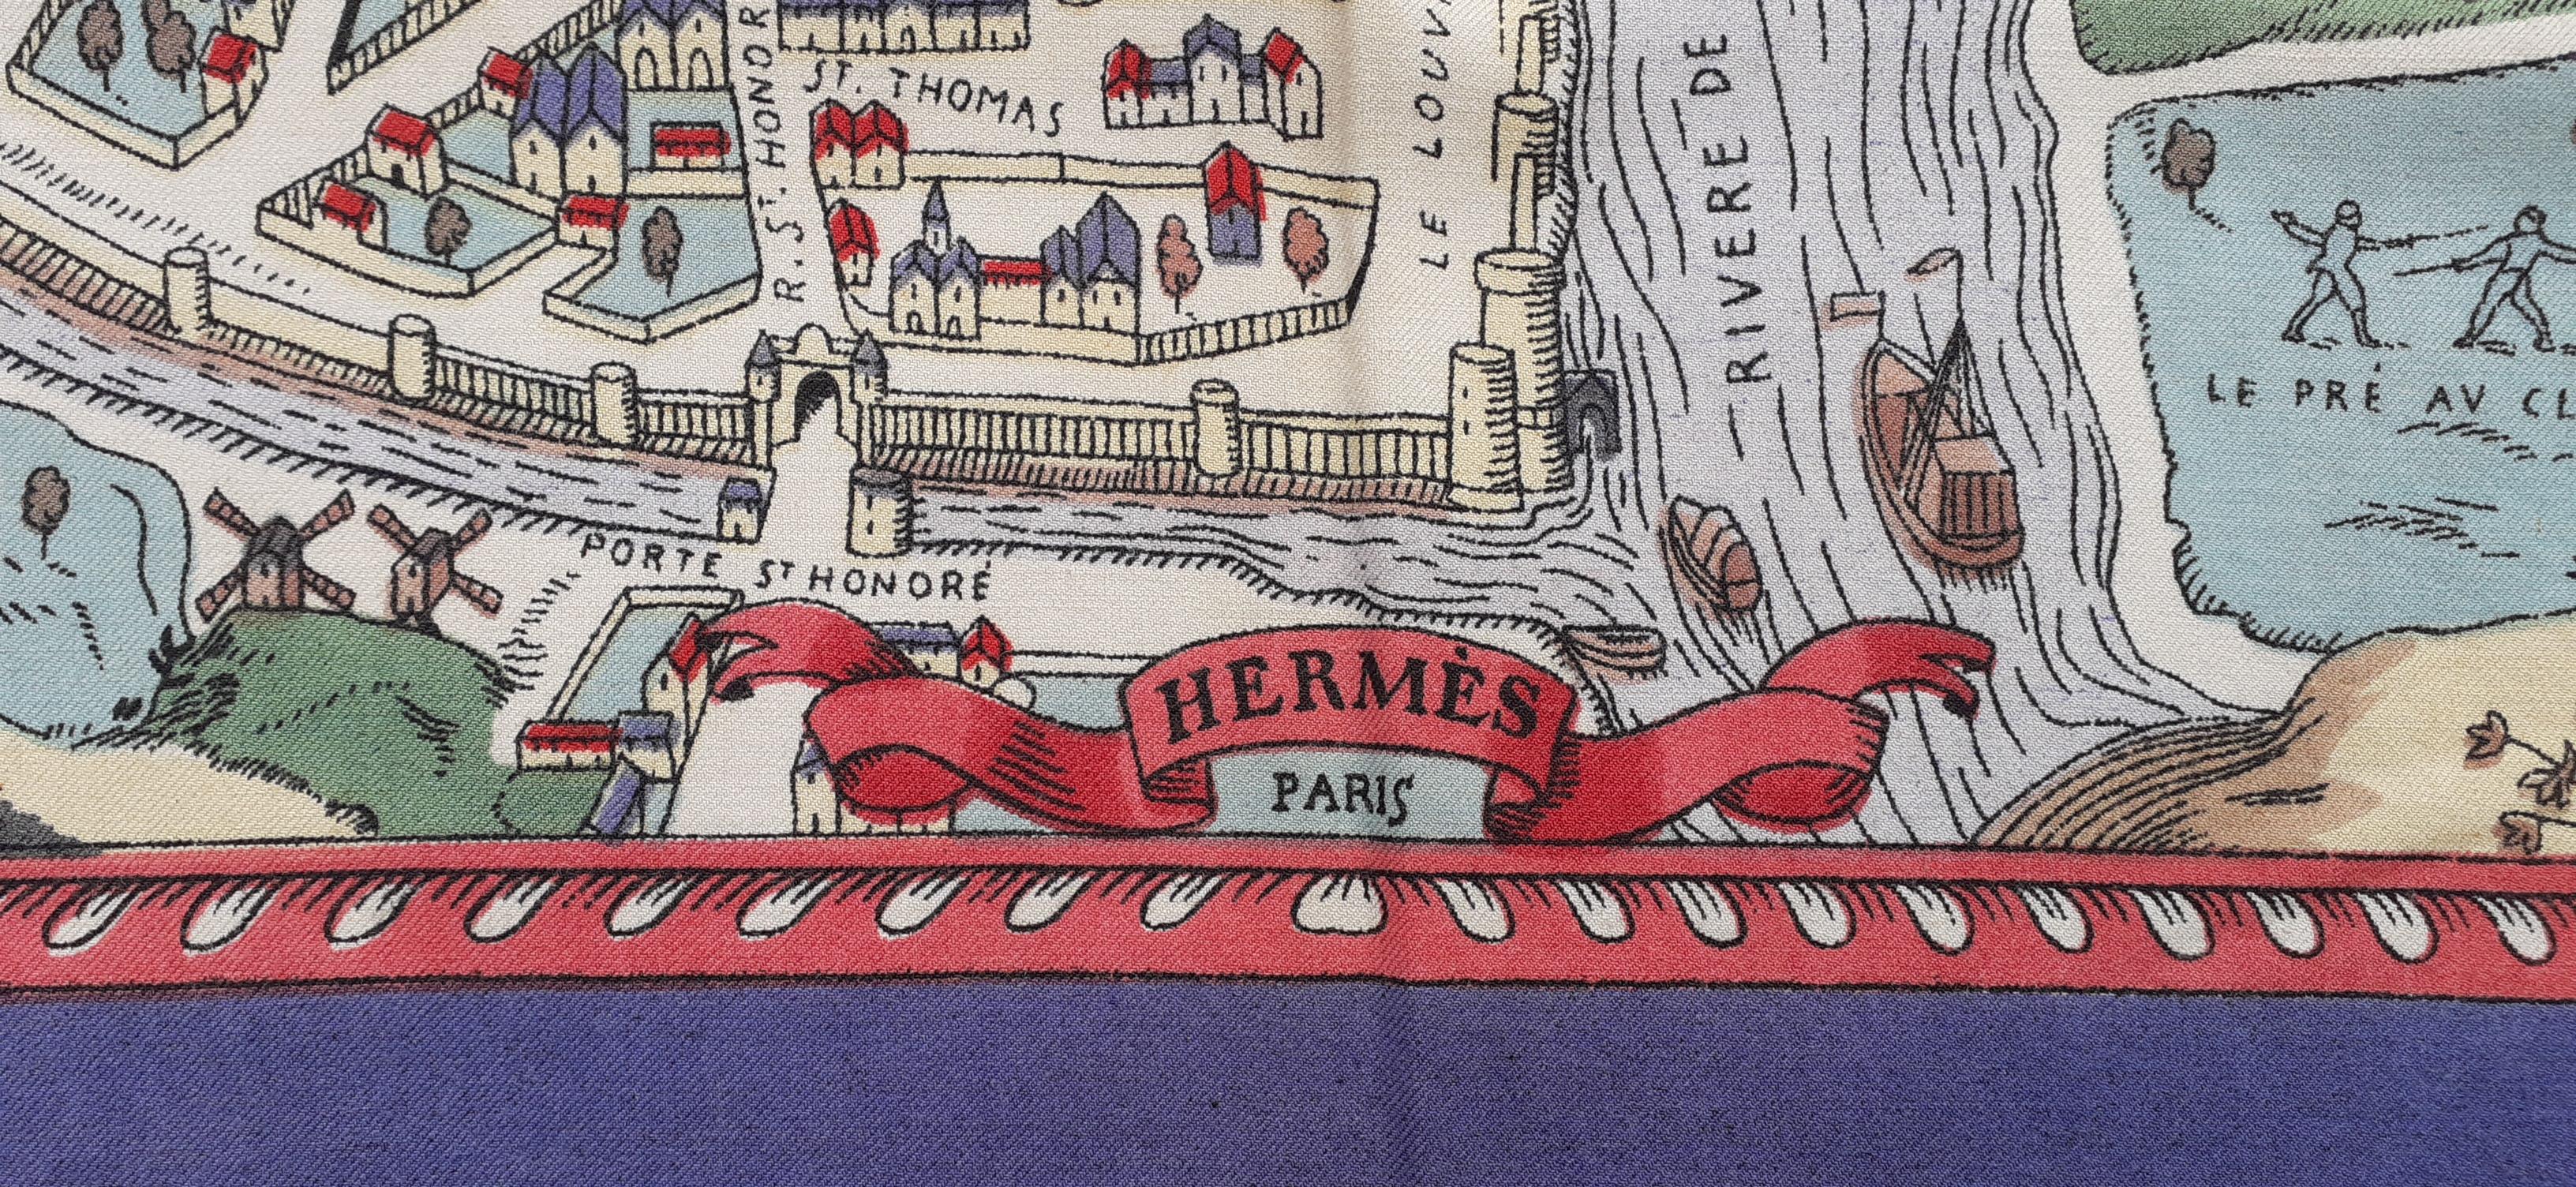 Extremaly Rare Authentic Hermès Scarf

Pattern: 